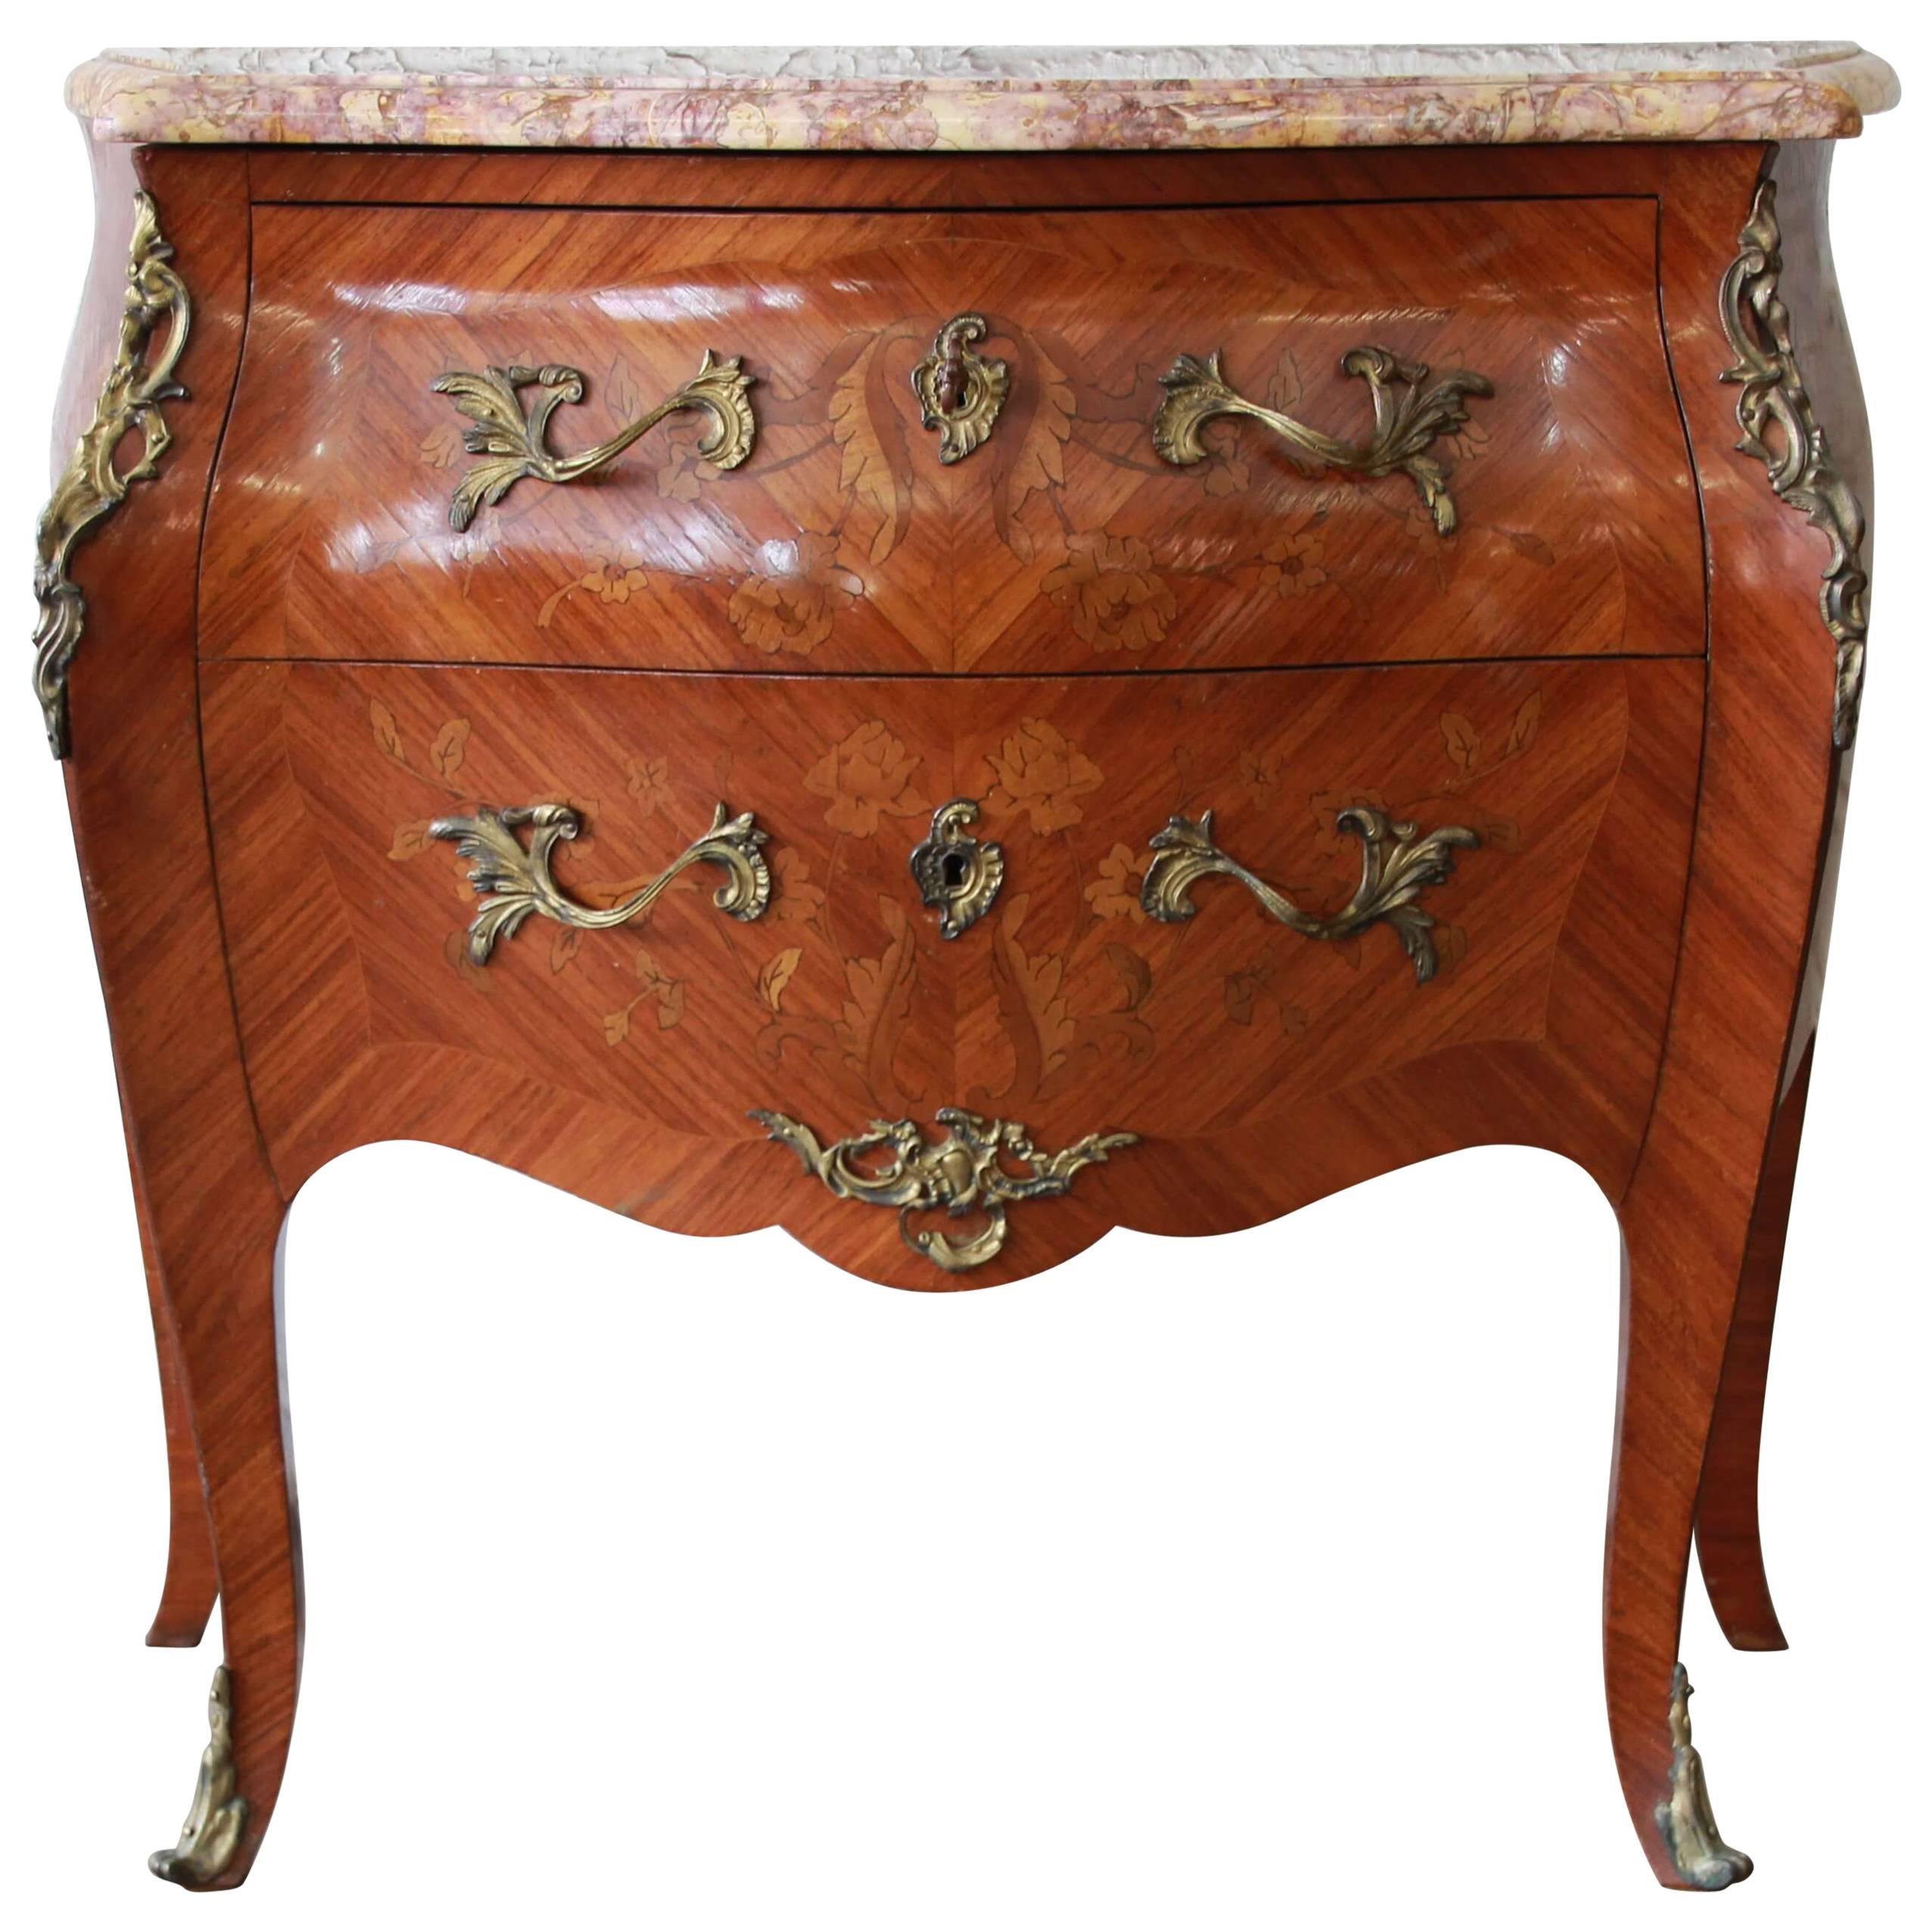 French Marble-Top Inlaid Bombay Chest with Mounted Bronze Ormolu